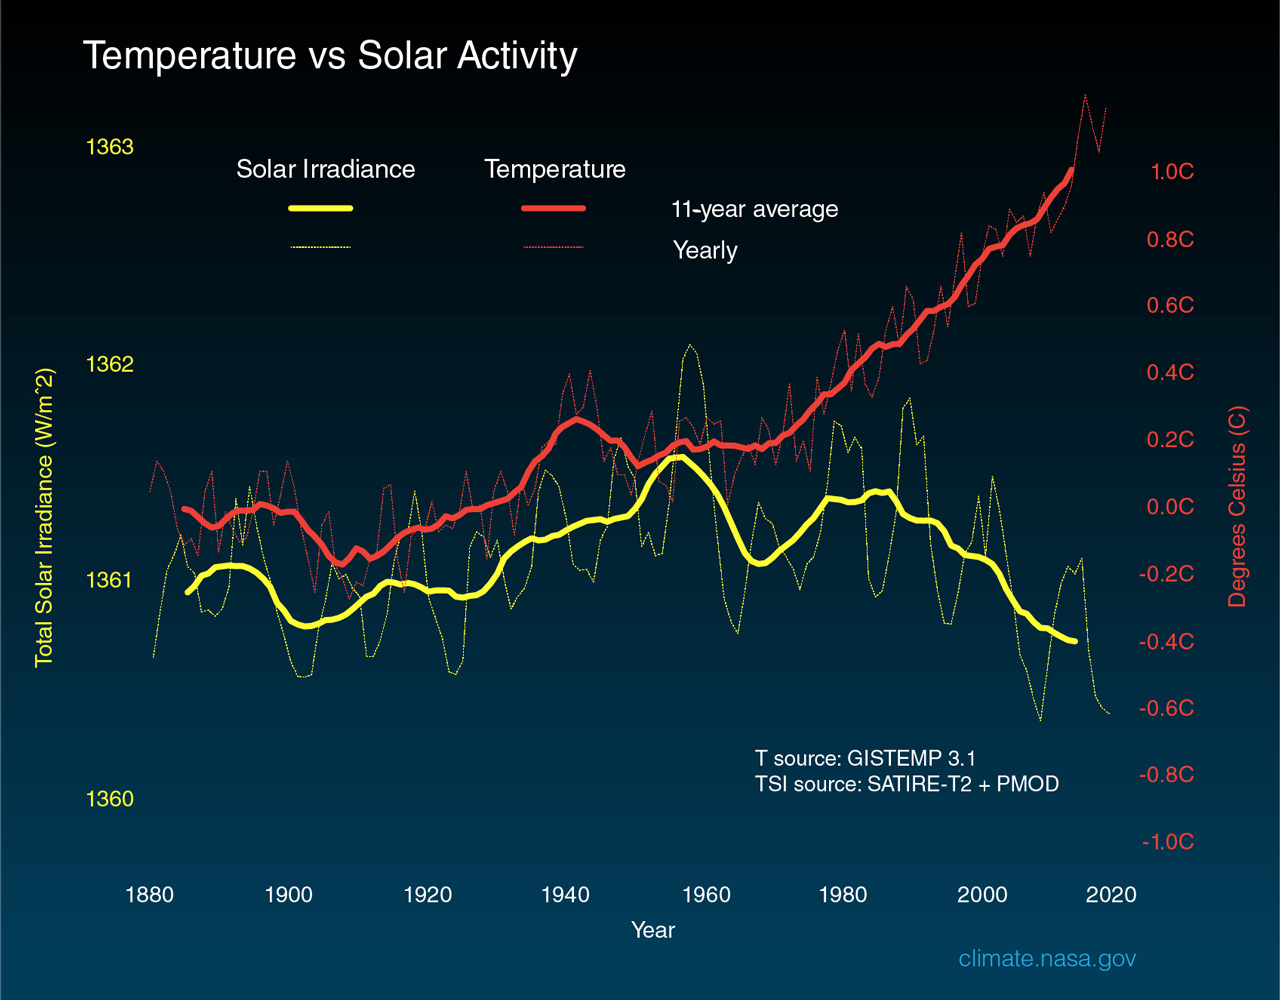 A line graph labeled: Temperature Vs. Solar Activity showing Time (Year) on the X-axis, Total Solar Irradiance (W/m2) on the left y-axis, and Degrees Celsius (C) on the right y-axis. The x-axis is labeled in 20-year increments, 1880 - 2020. The left y-axis is labeled as 1360, 1361, 1362, 1363. The right y-axis is labeled in 0.2 degree increments starting with -1.0 degree C to 1.0 degree C. The Key shows that the yellow line represents solar irradiance and the red line represents temperature. The data shows as temperature increases exponentially, solar irradiance remains fairly stable. This data shows 11-year average trends, which corresponds with the Solar Cycle.